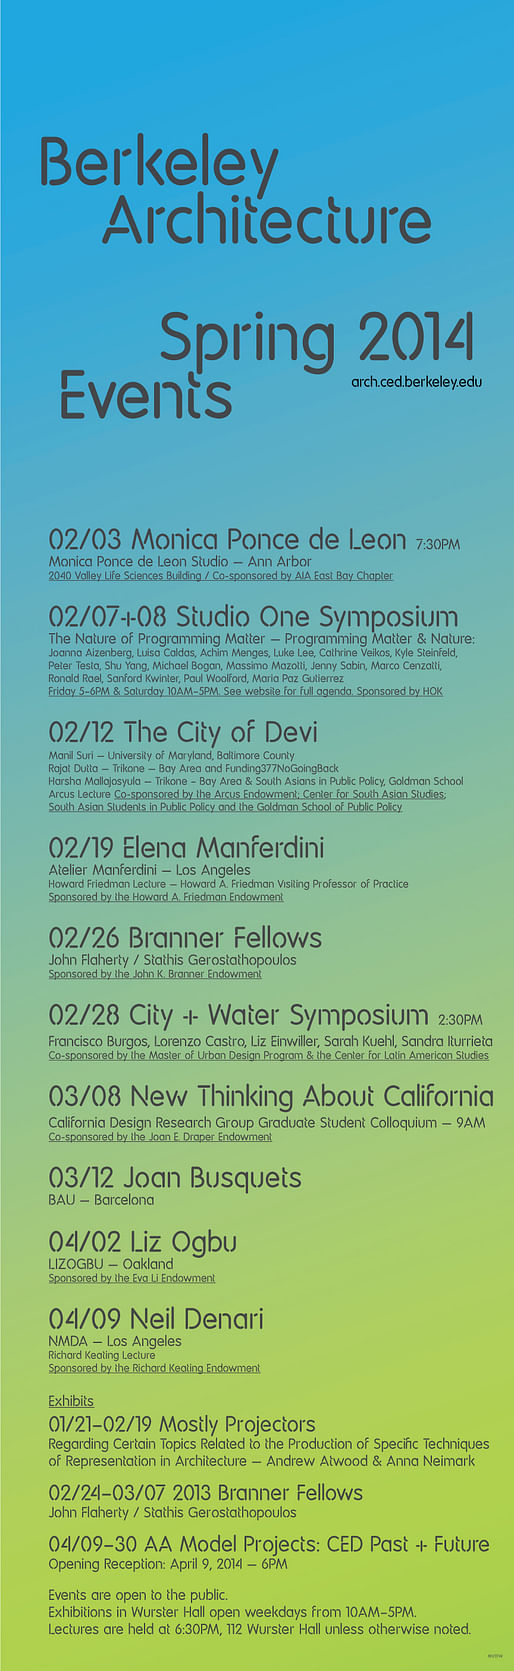 UC Berkeley College of Environmental Design, Spring '14 Lecture Events. Image courtesy of UC Berkeley CED.